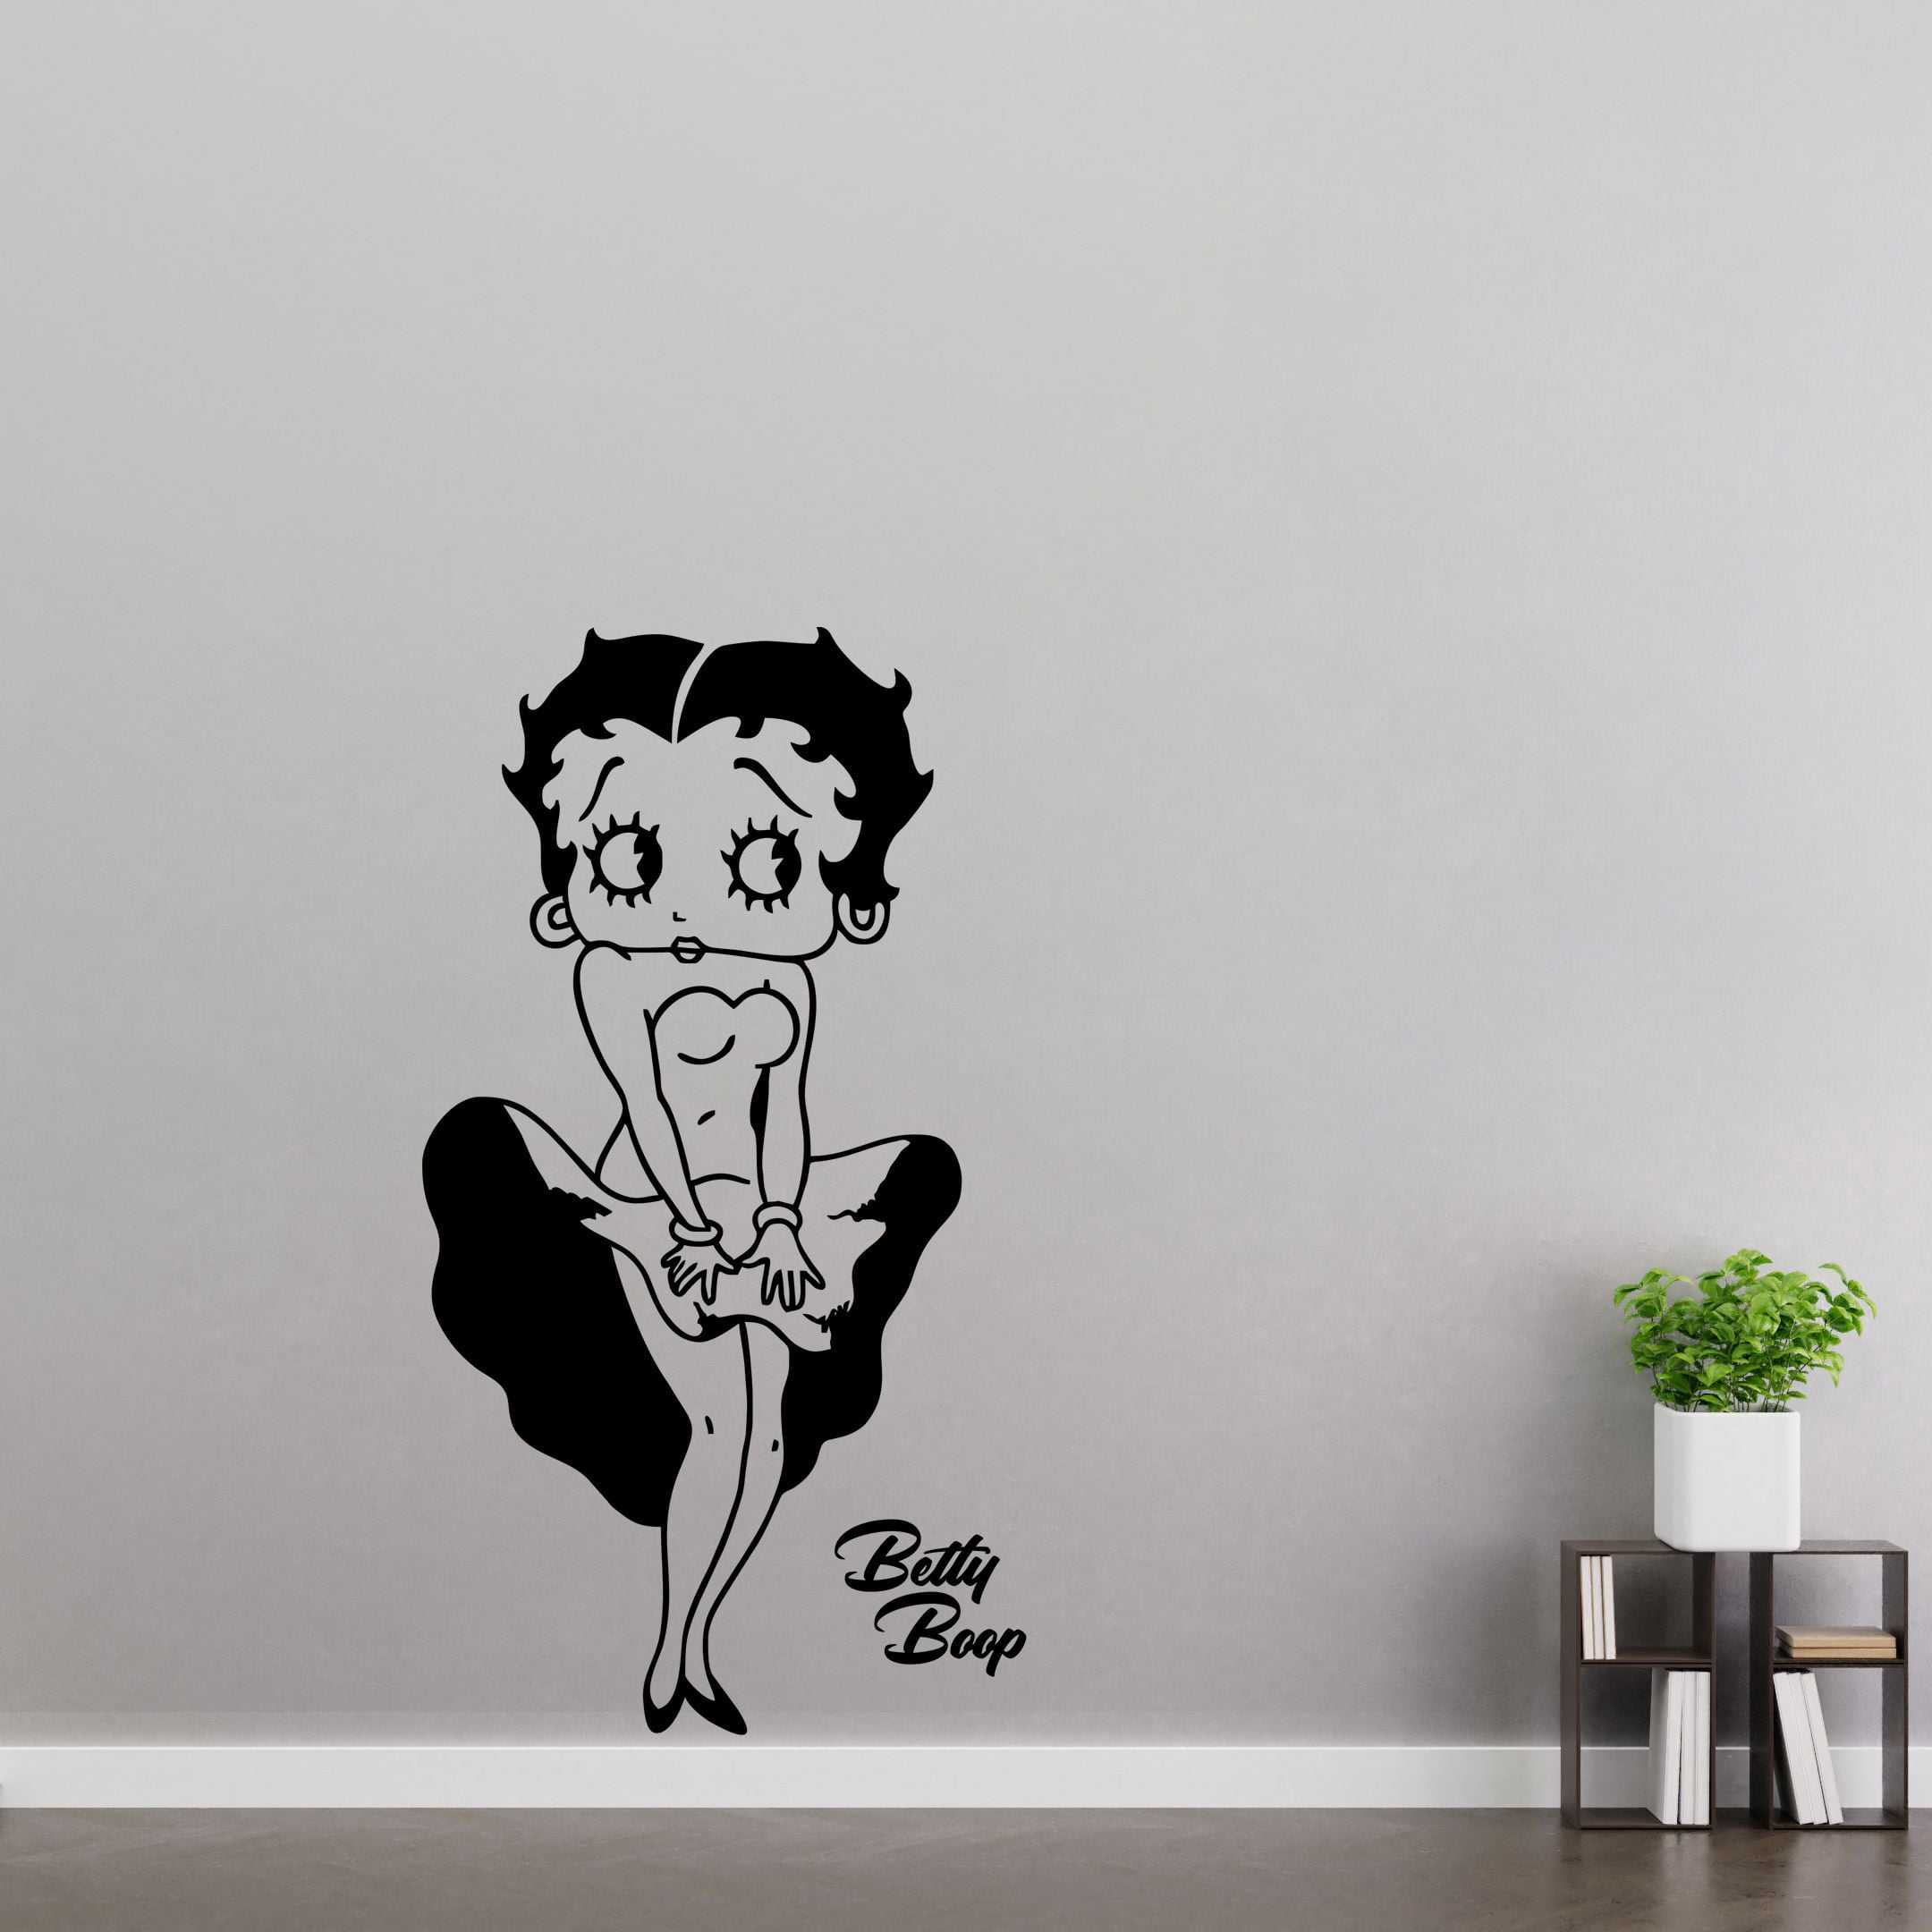 Icon Cartoon Character Betty Boop On Marilyn Monroe Famous Pose